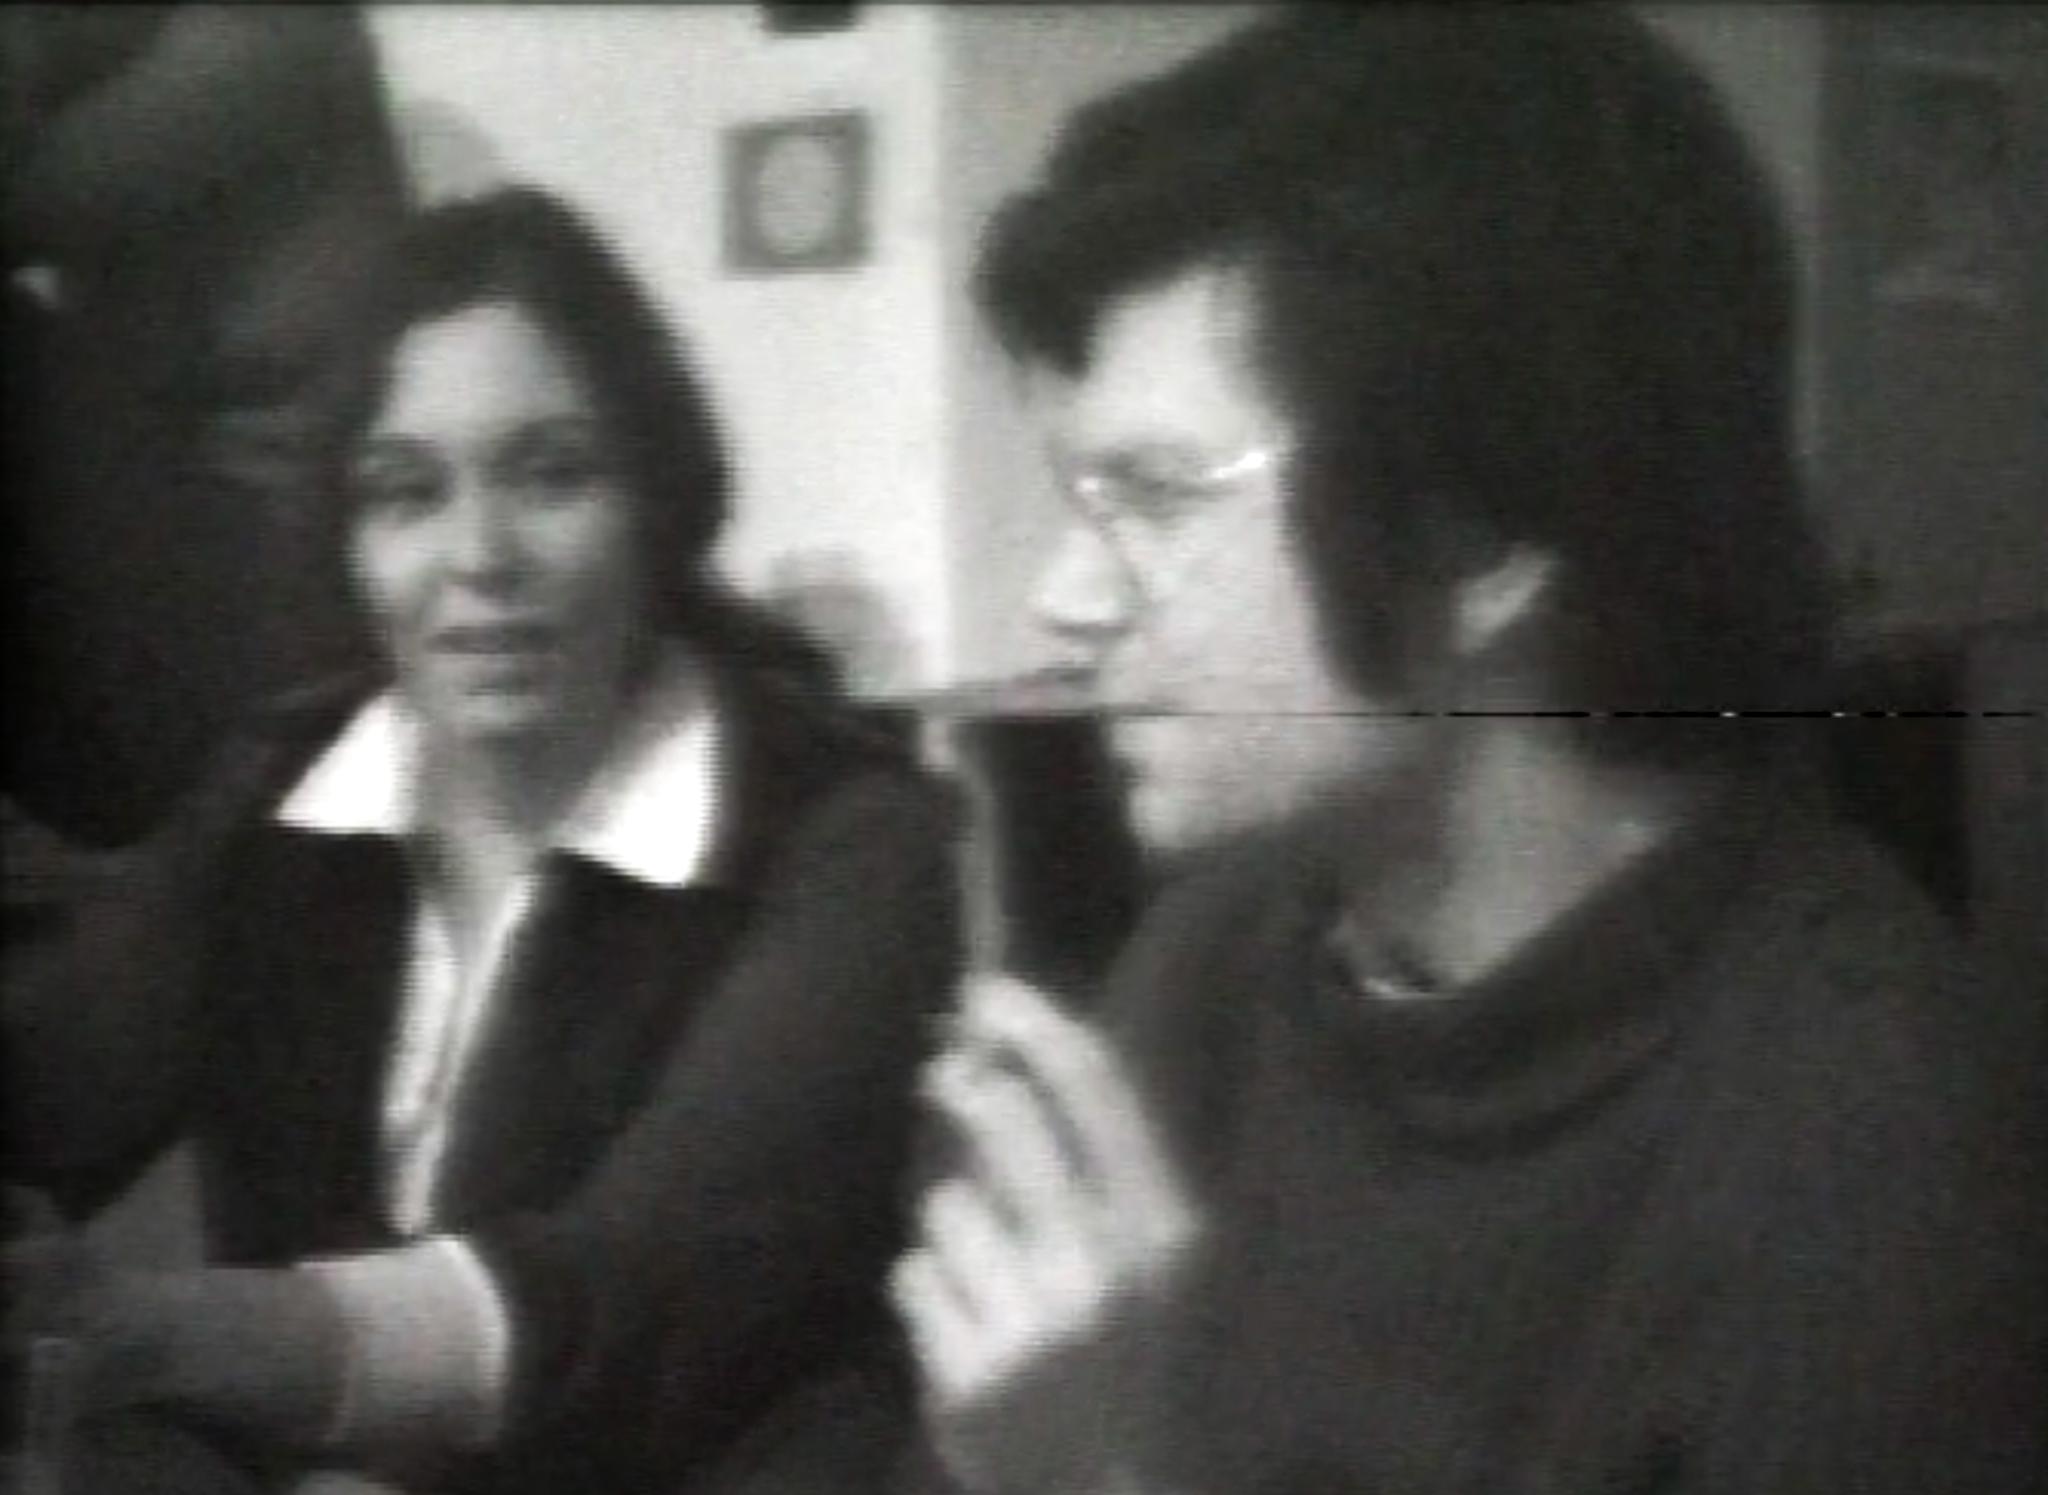 Black and white, a young woman and man seated next to each other in conversation.